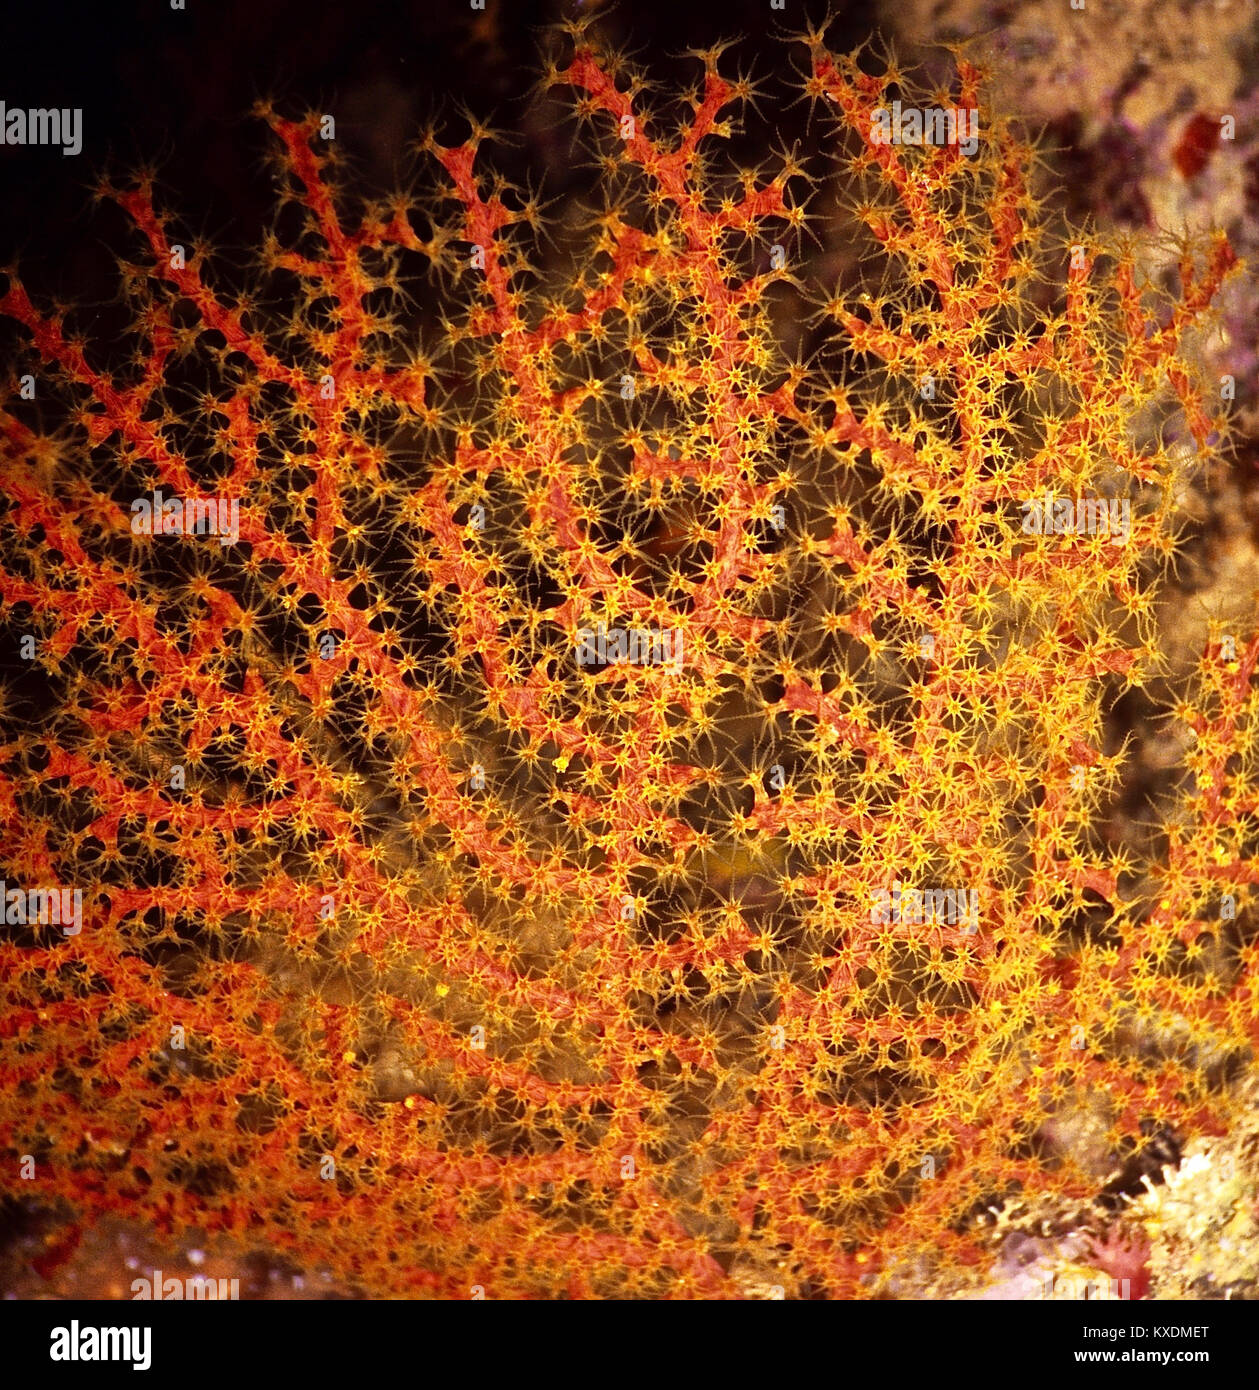 A gorgonian coral (Acabaria species) with its eight tentacle polyps extended fully and feeding in the current. Photographed in the Egyptian Red Sea. Stock Photo